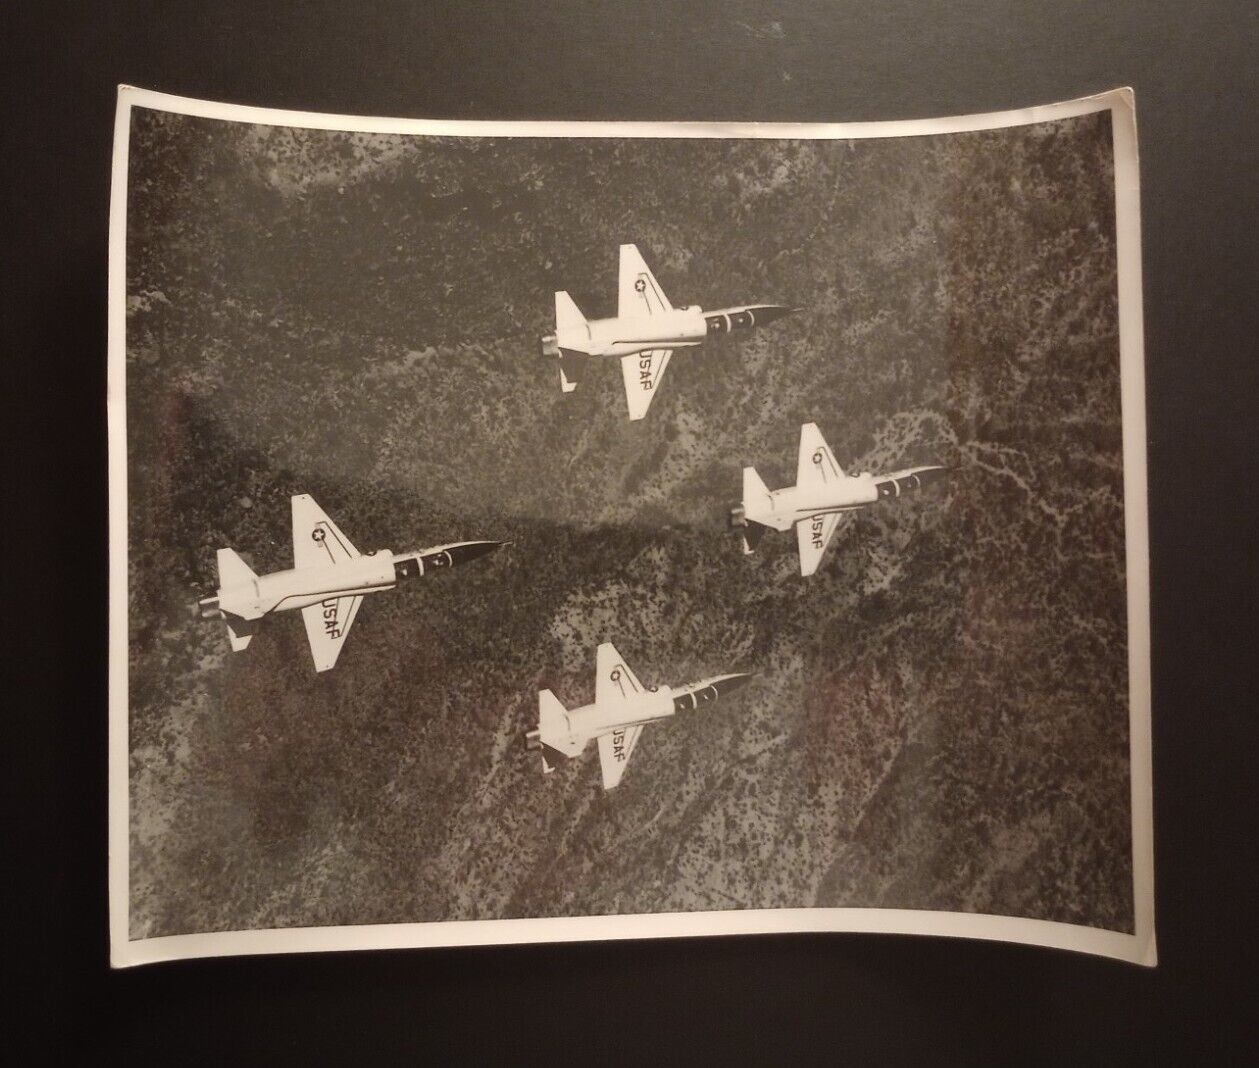 Northrup Norair Press Photo (1964) T-38 Talon Jet Trainers in Formation